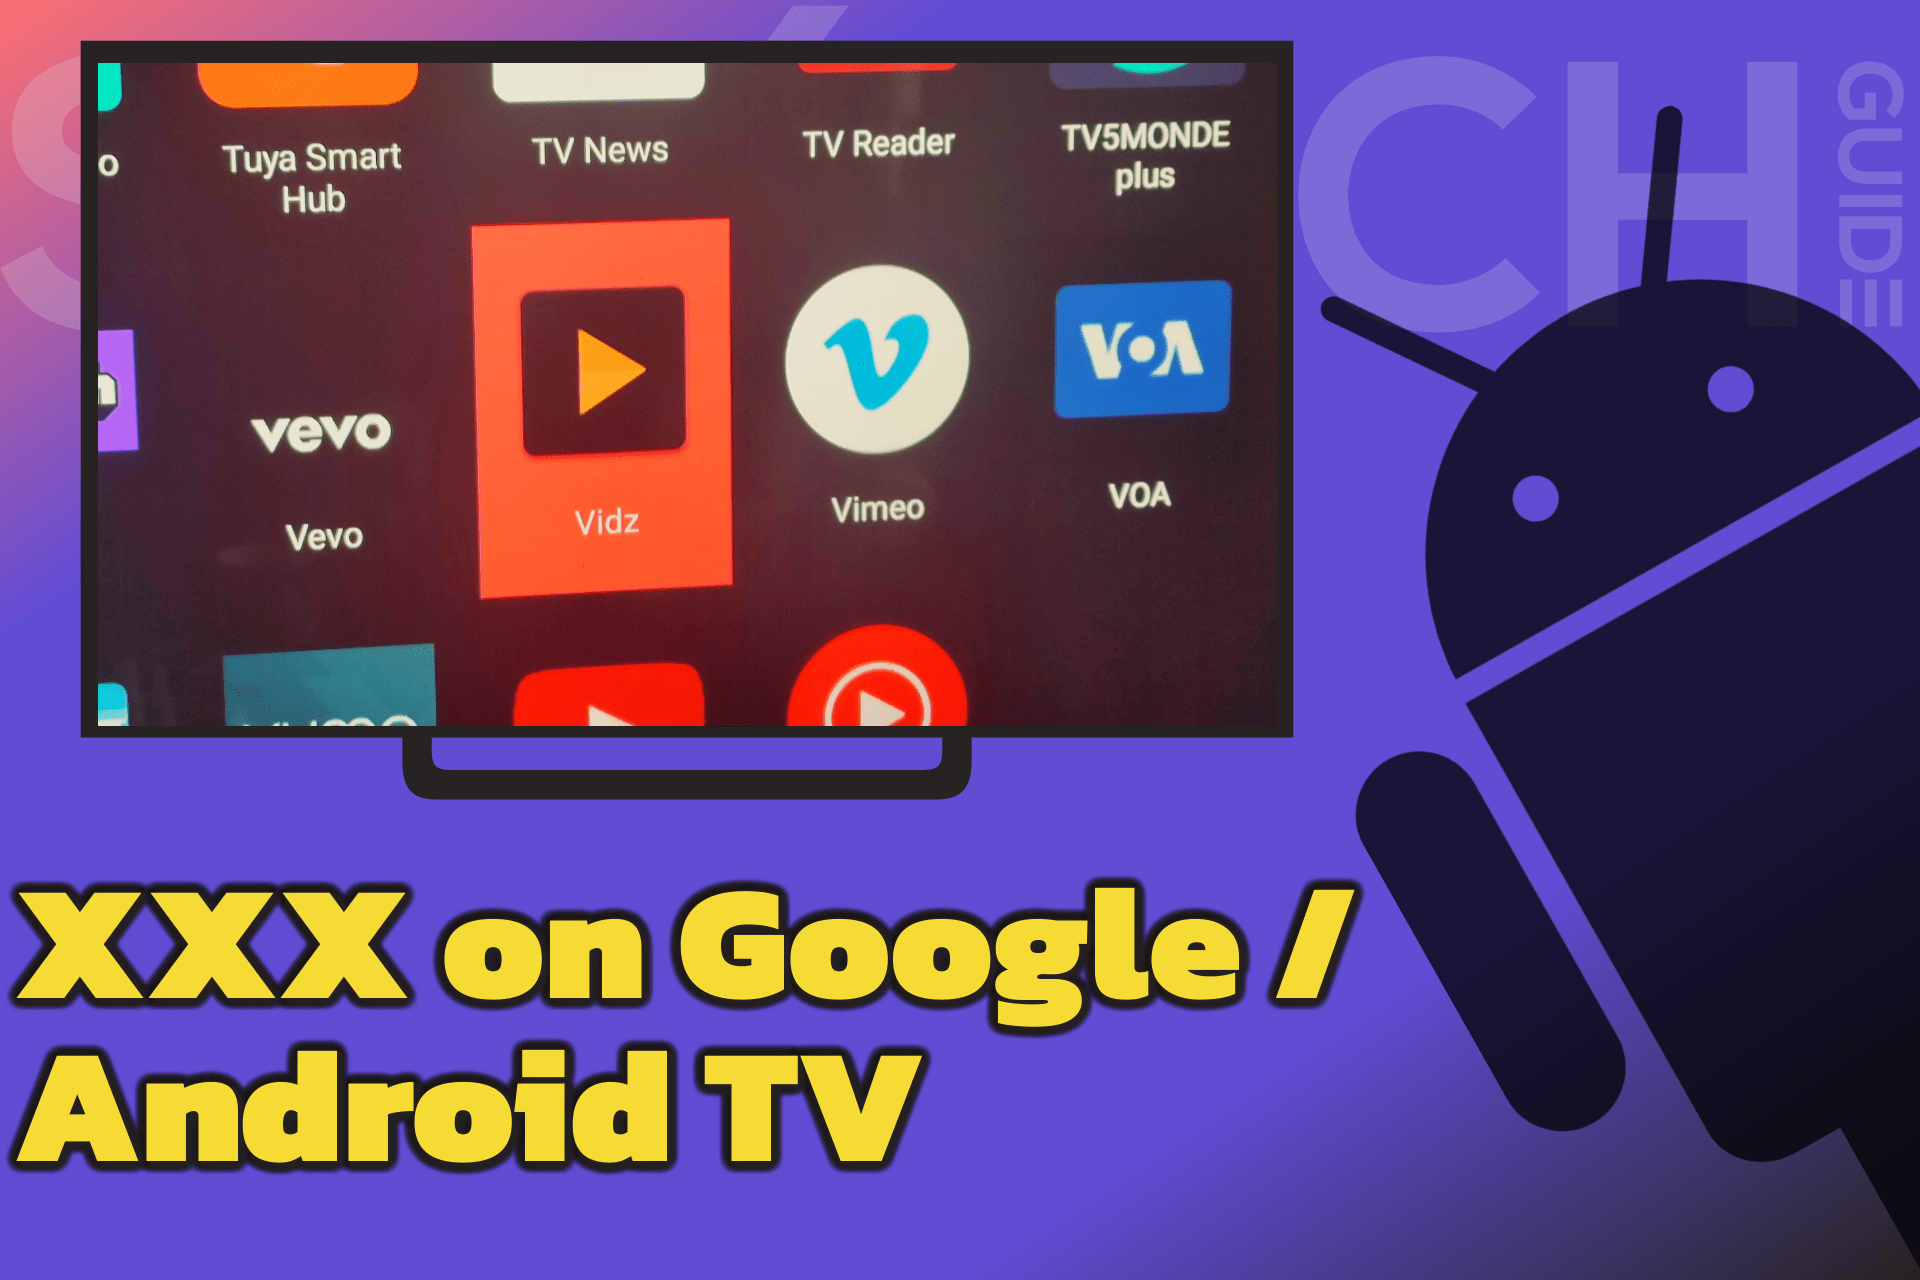 Watch Porn on Google TV / Android TV